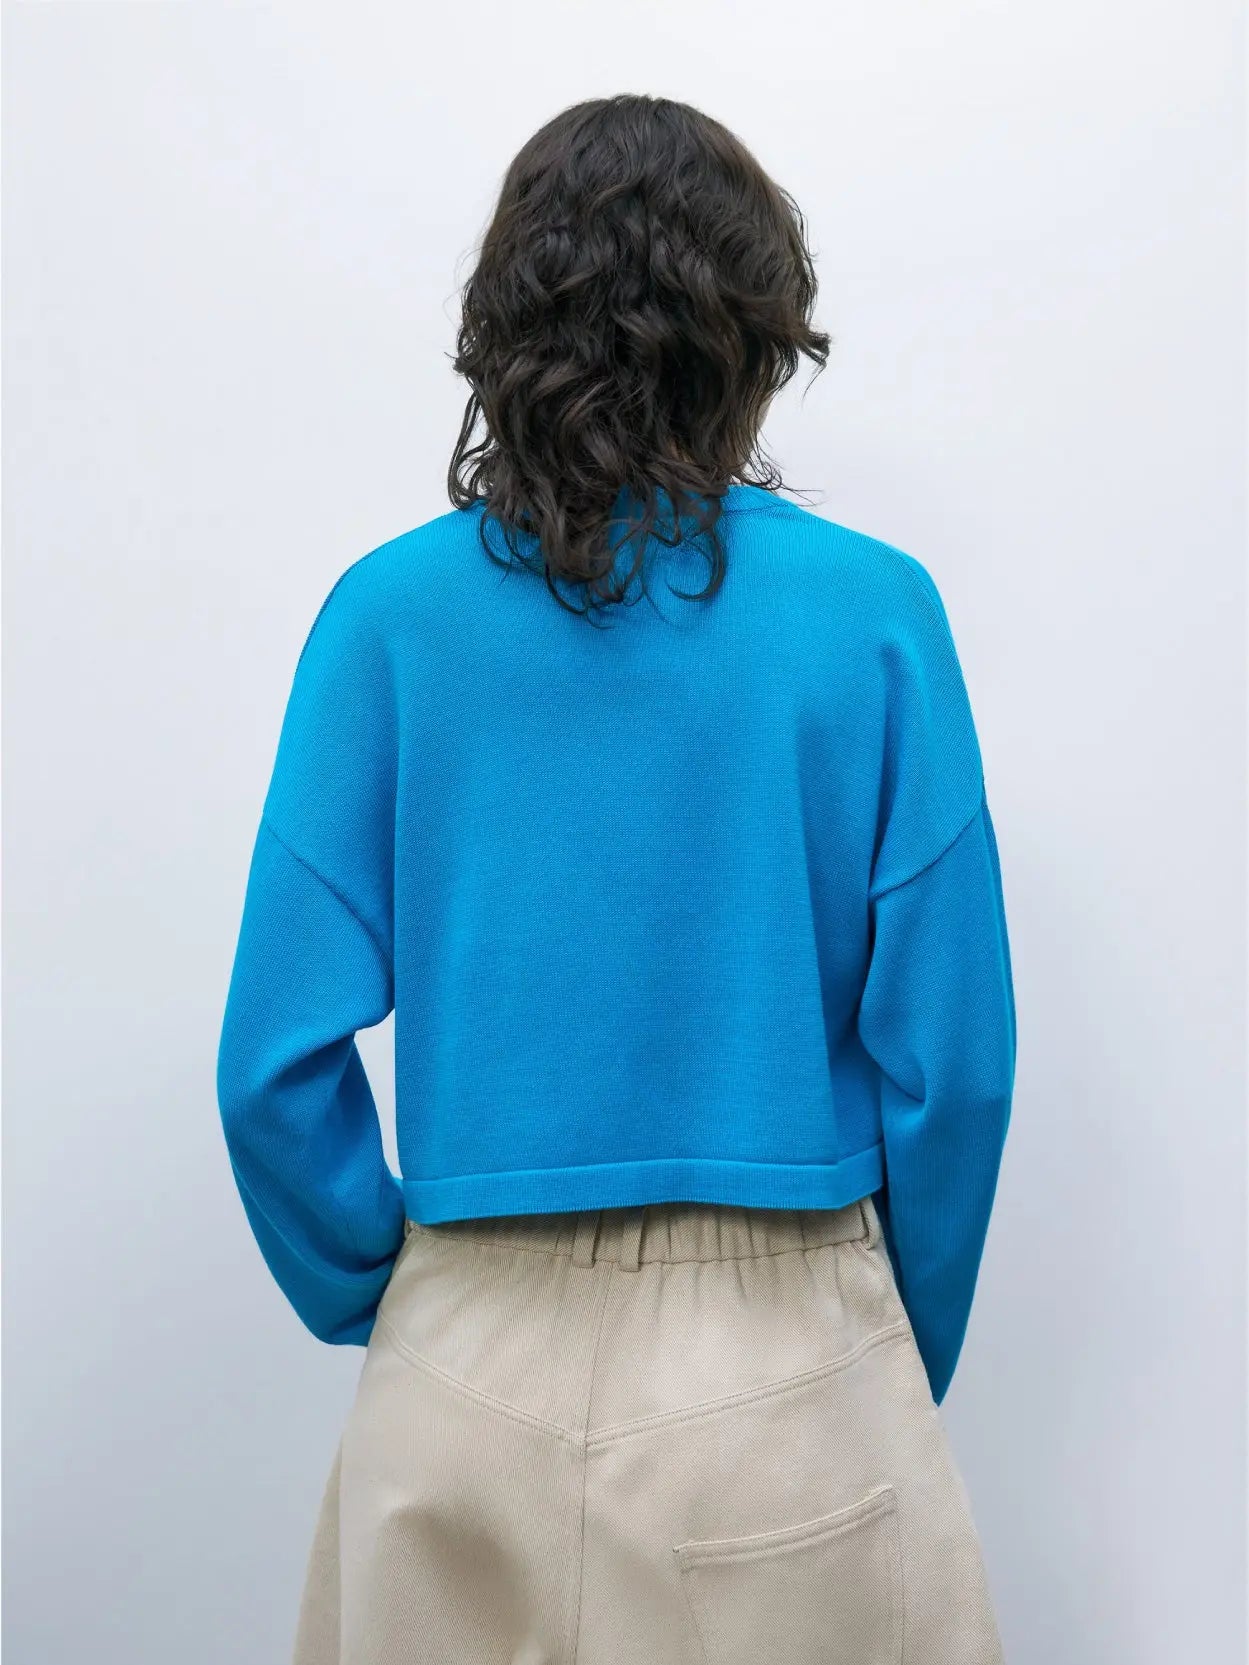 A bright blue, long-sleeve Cotton Cropped Cardigan Ceruleo with a round neckline and black buttons down the front, available exclusively at Bassalstore in Barcelona. The cardigan is displayed against a white background.